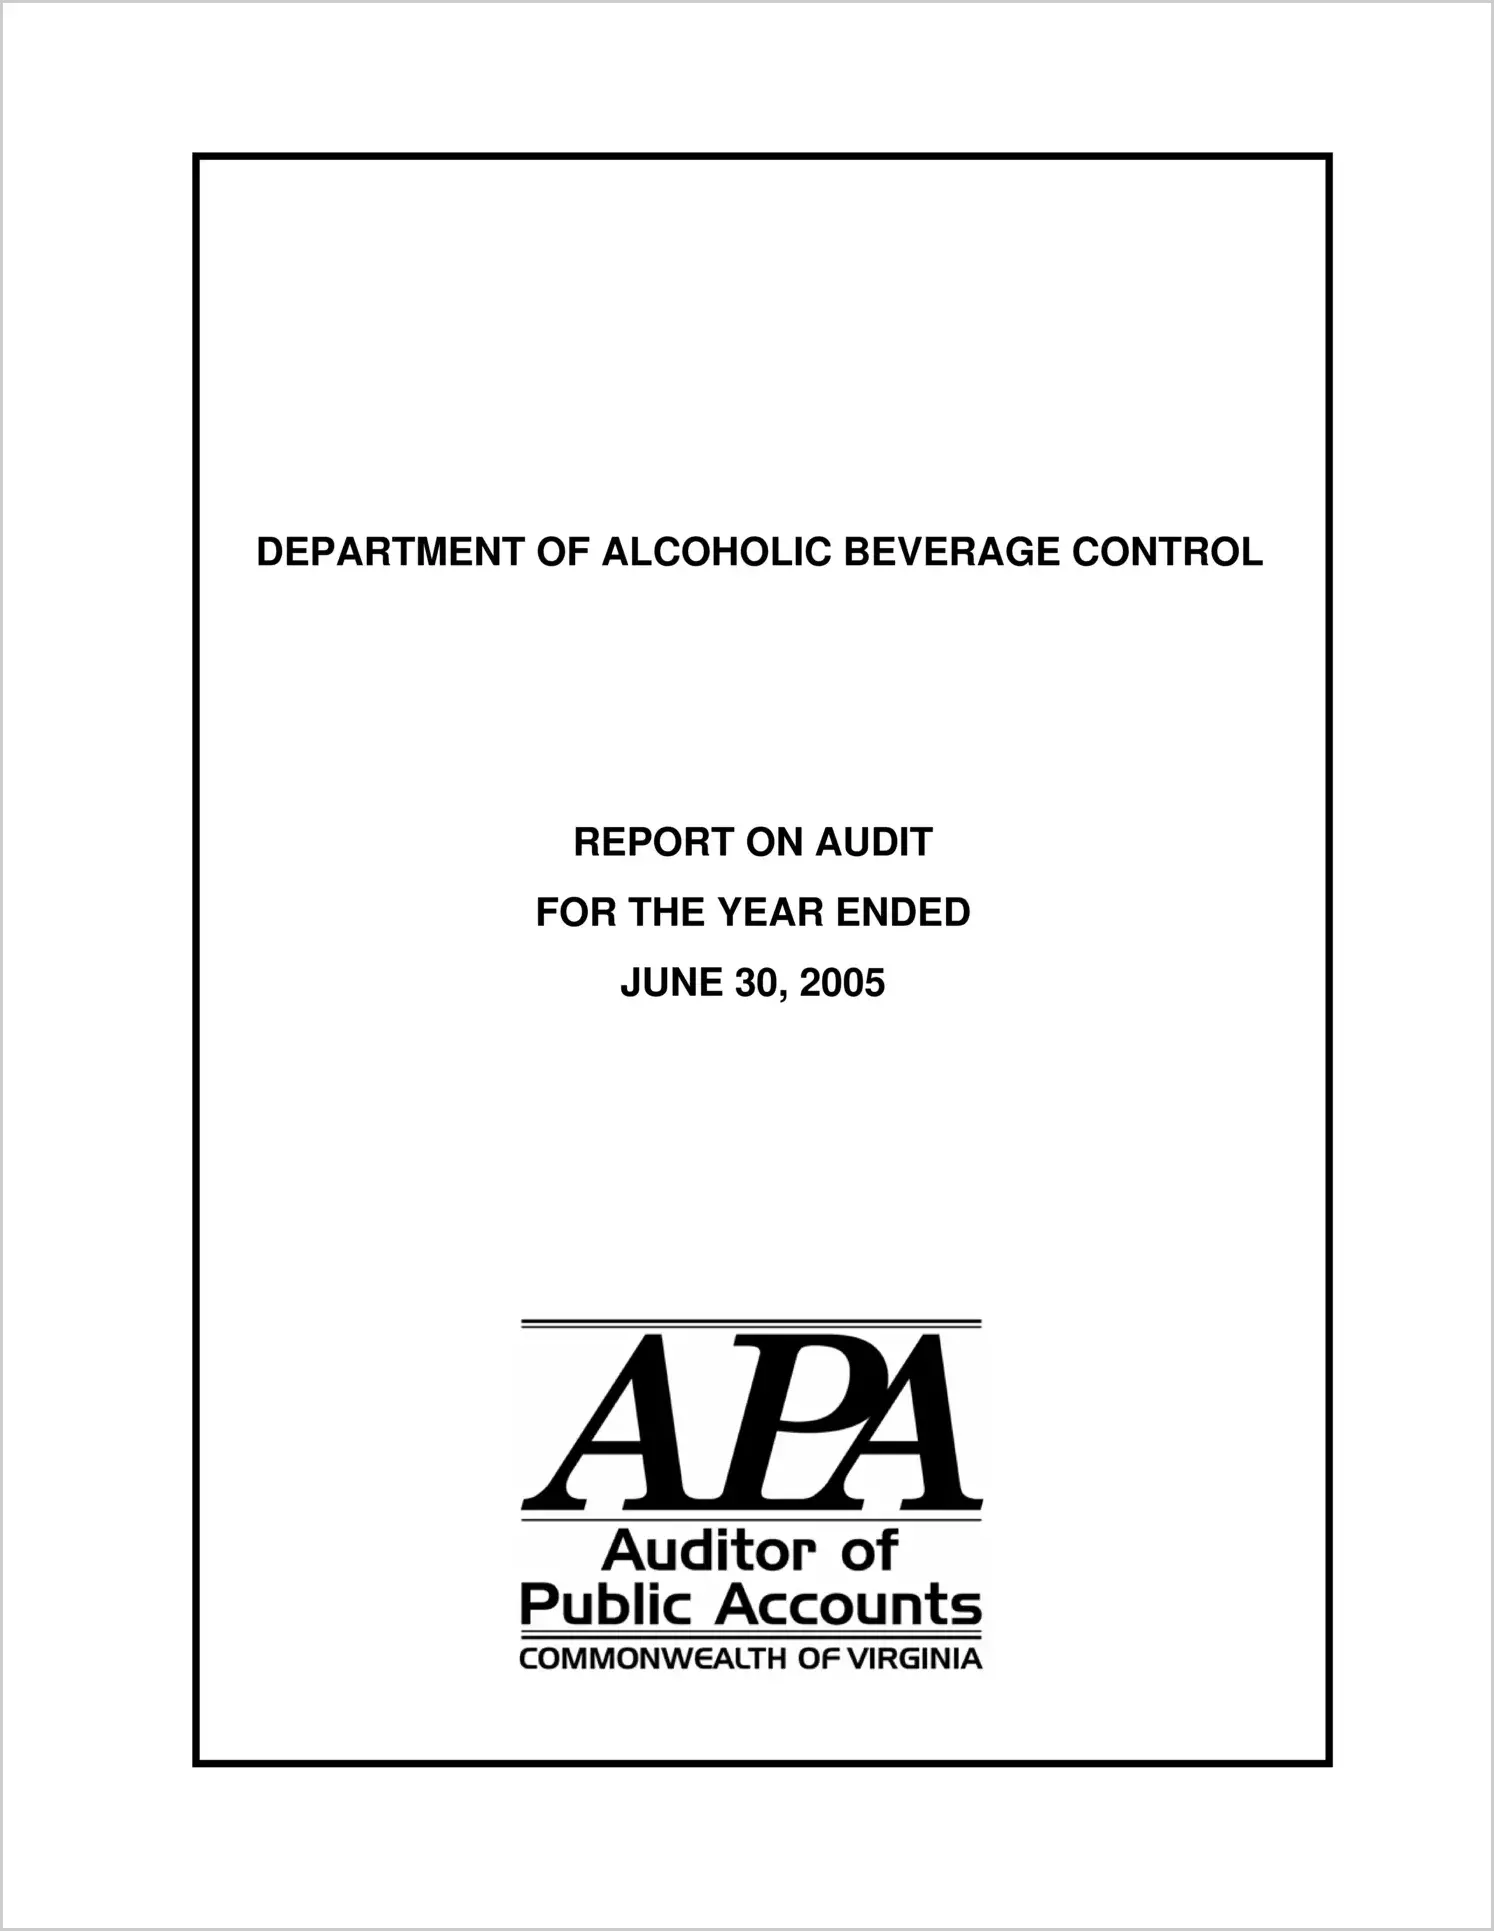 Department of Alcoholic Beverage Control for the year ended June 30, 2005